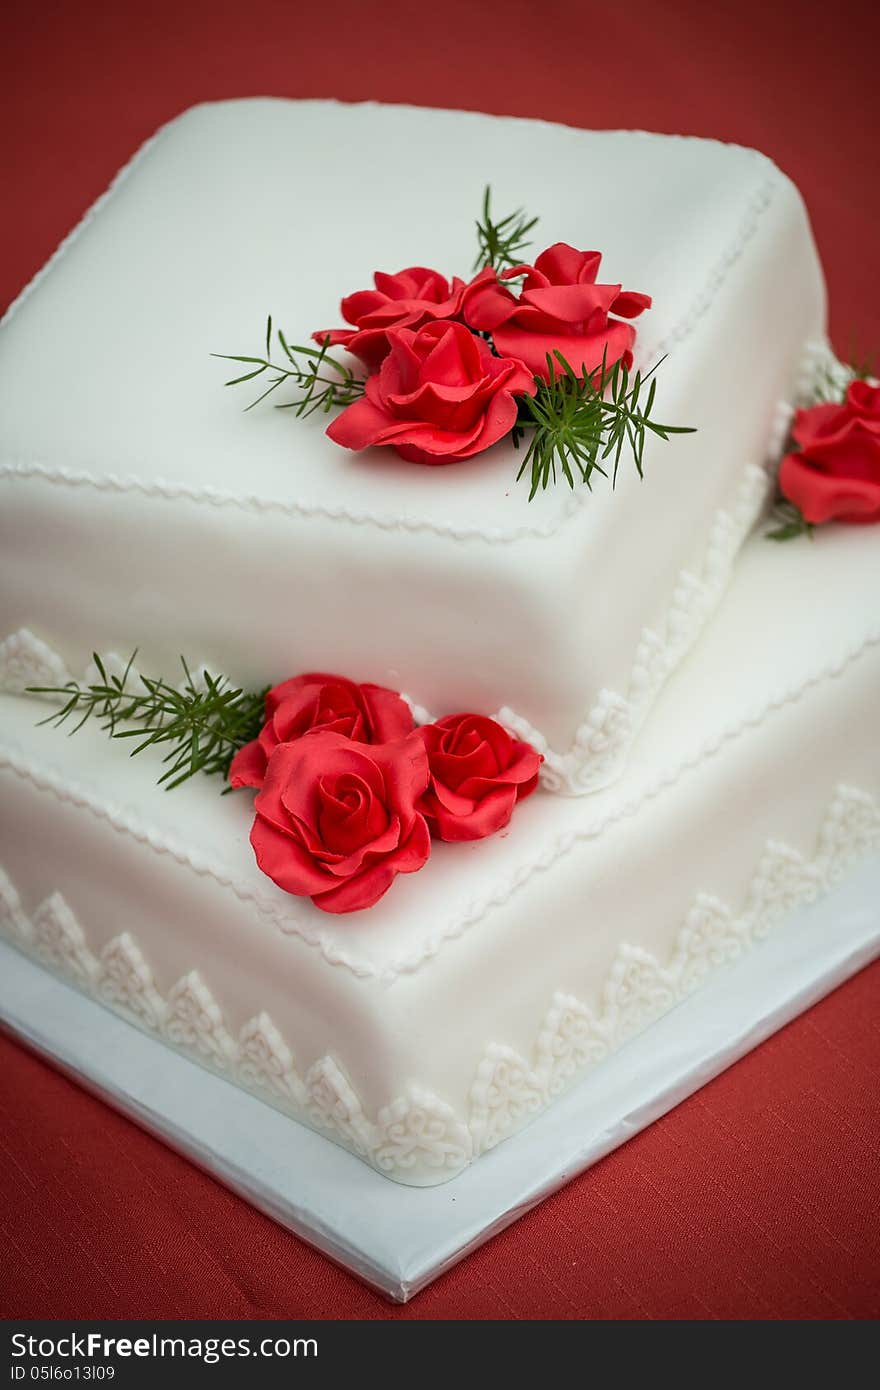 Wedding cake on a red tablecloth